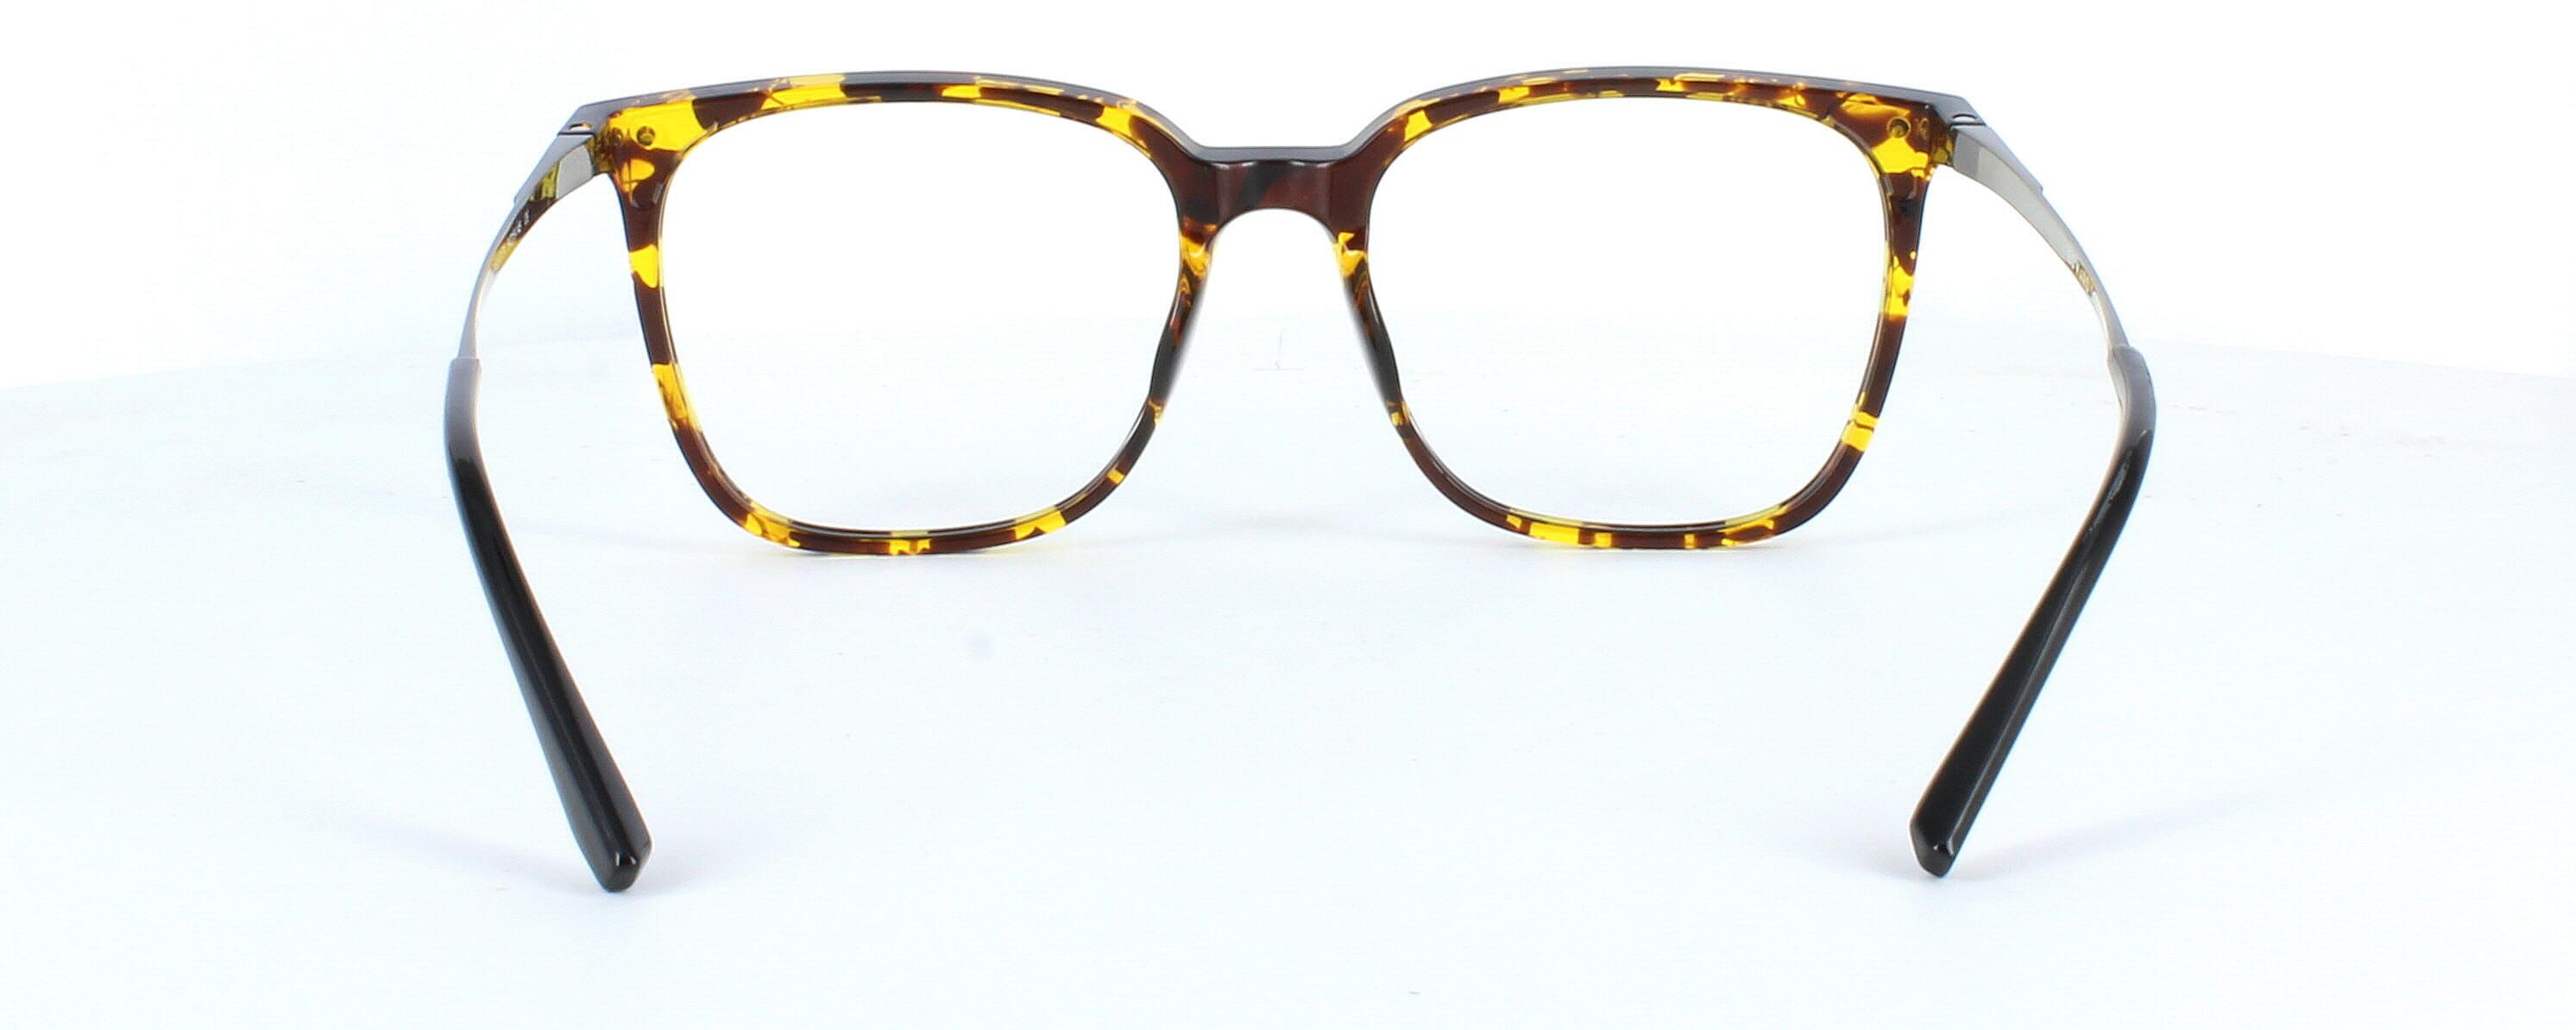 Edward Scotts ST6202 - Tortoise - Gent's acetate frame with square shaped lenses with silver titanium arms - image view 4